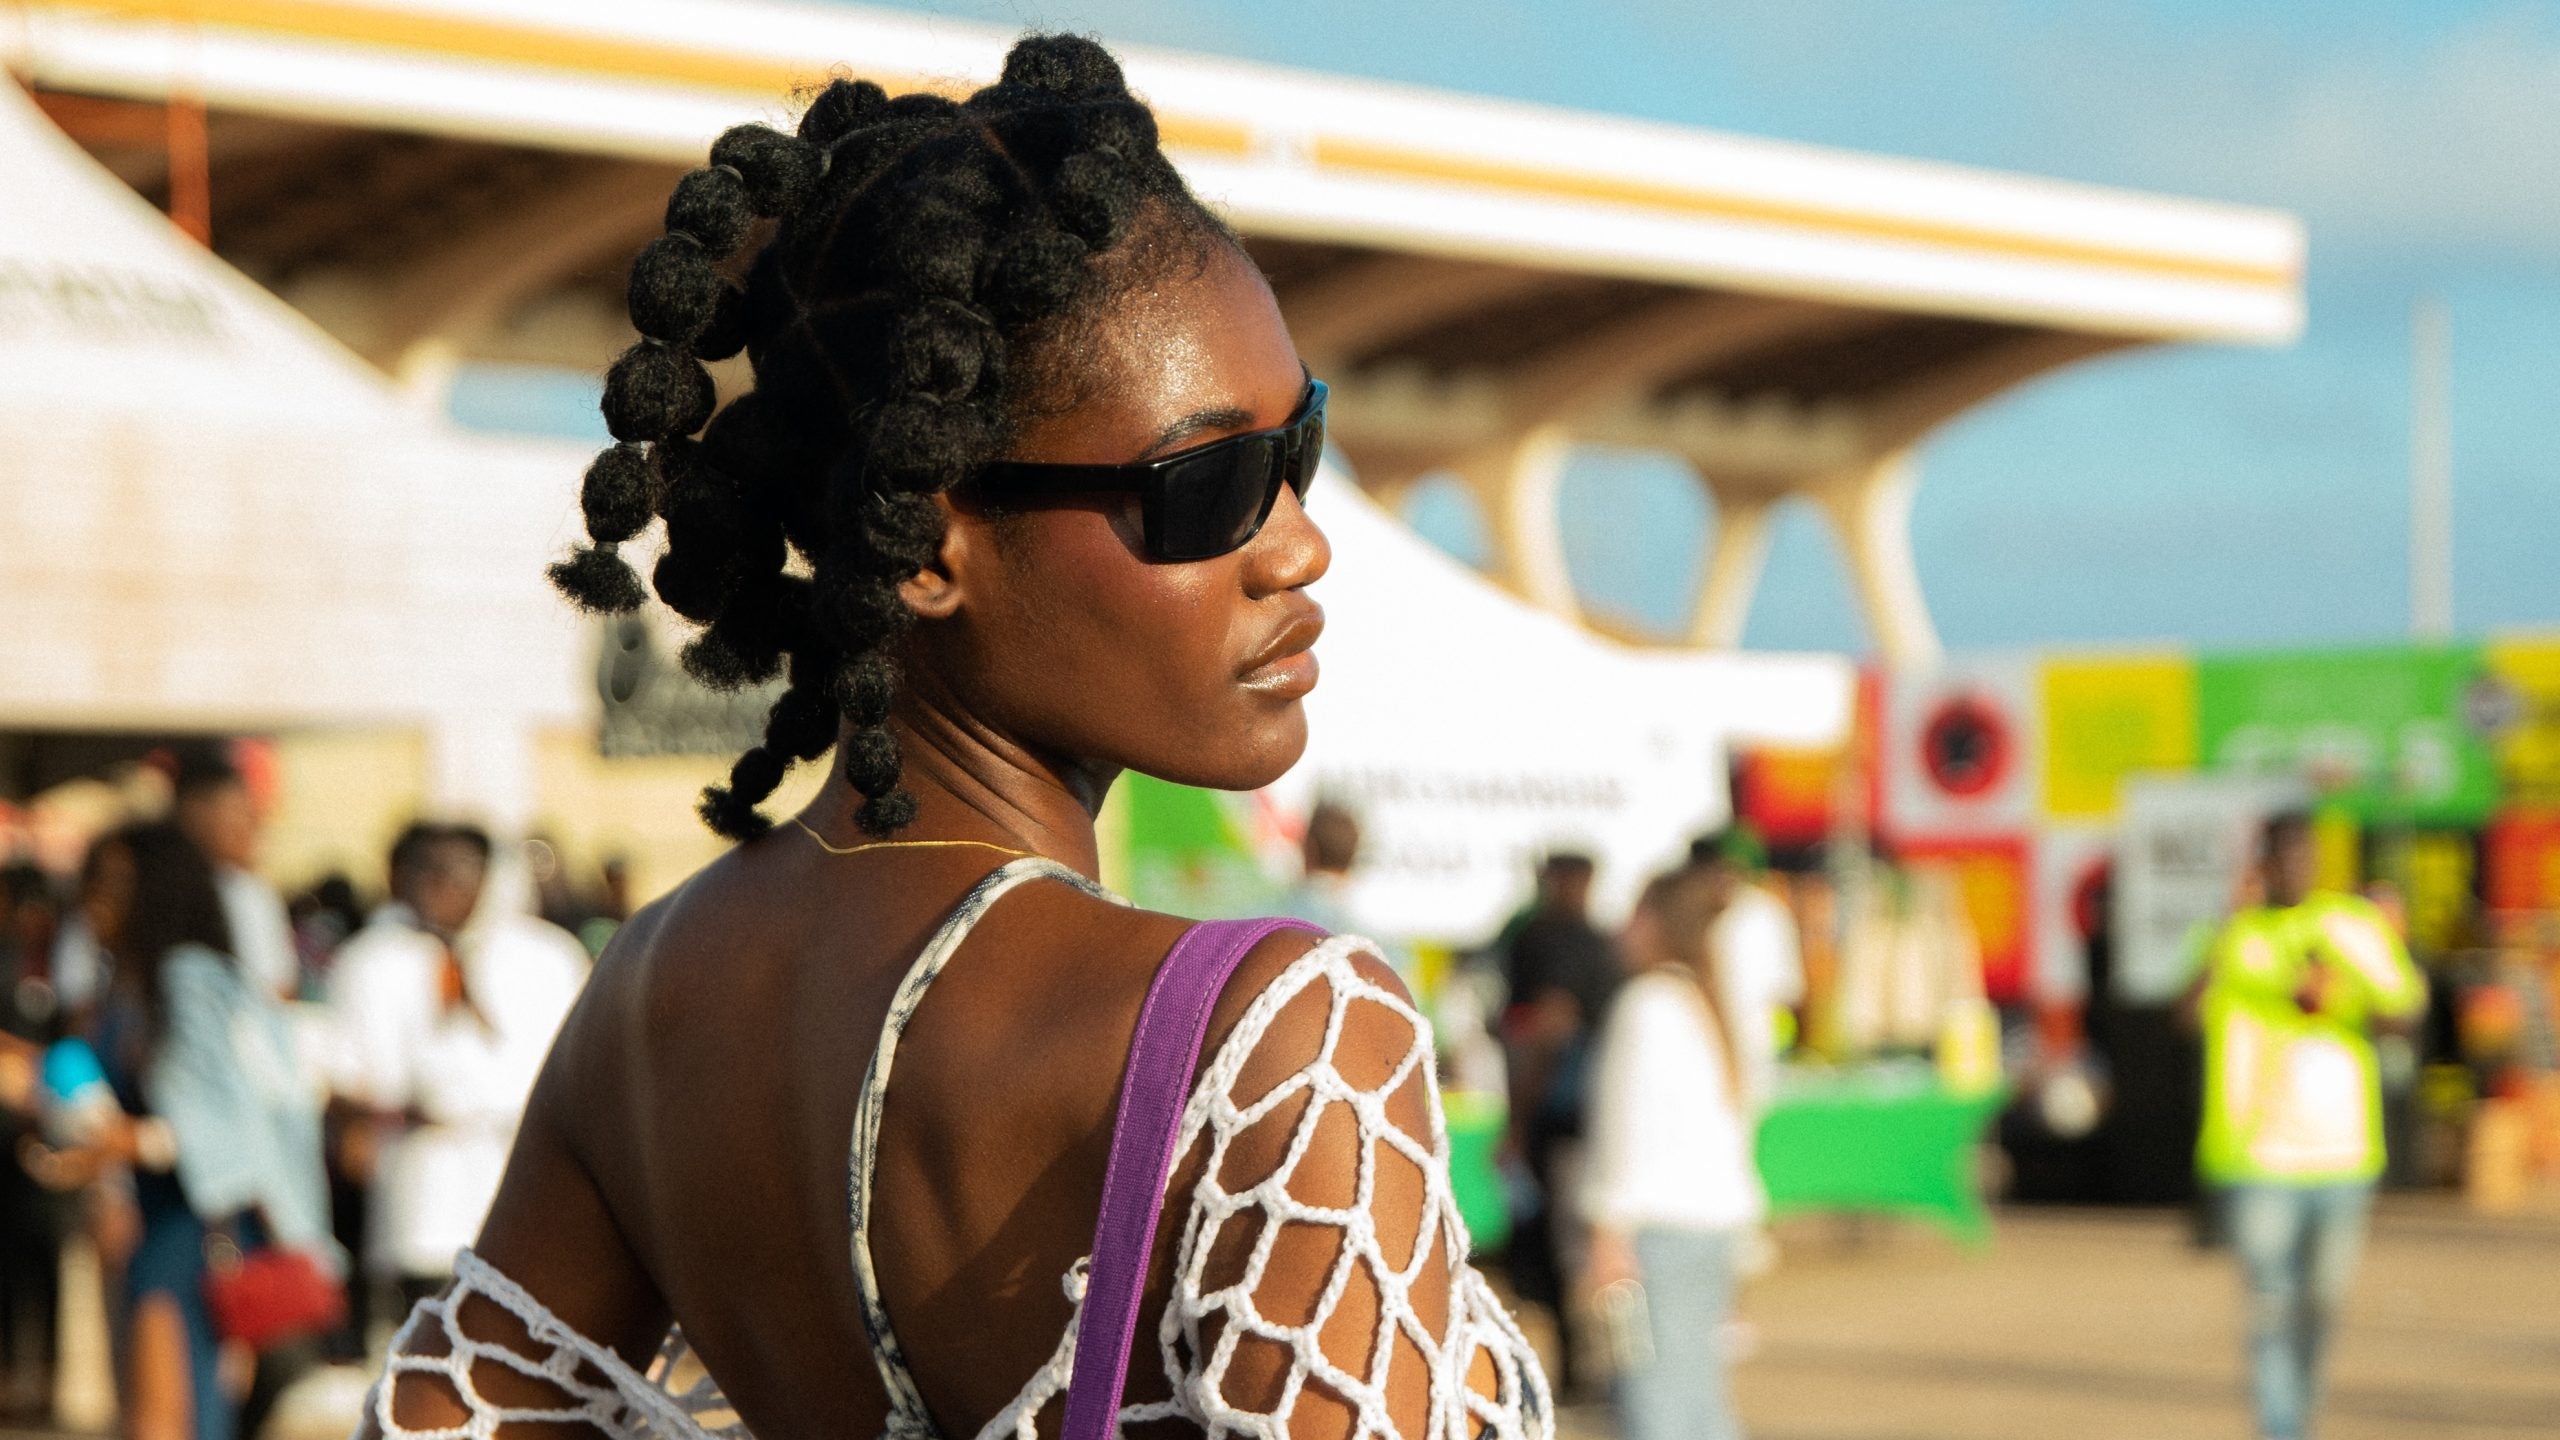 See The Hottest Street Style Looks From Accra's Global Citizen Festival